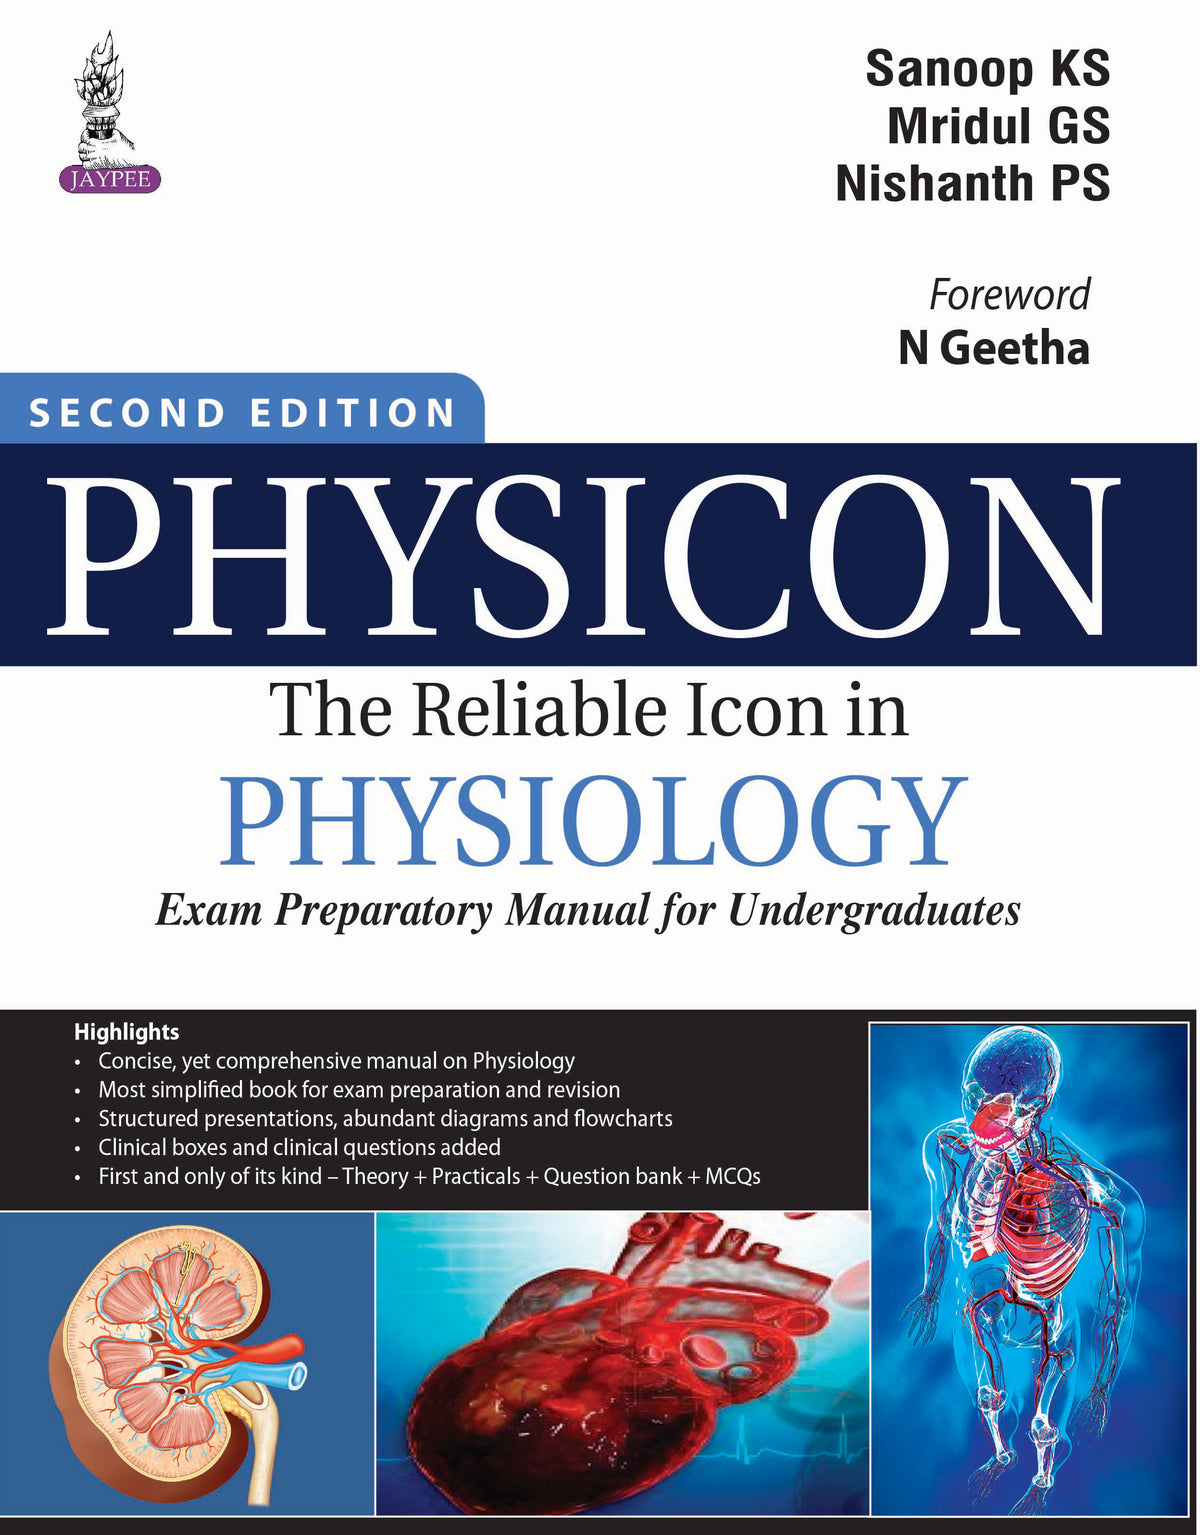 PHYSICON THE RELIABLE ICON IN PHYSIOLOGY EXAM PREPARATORY MANUAL FOR UNDERGRADUATES,2/E,SANOOP KS